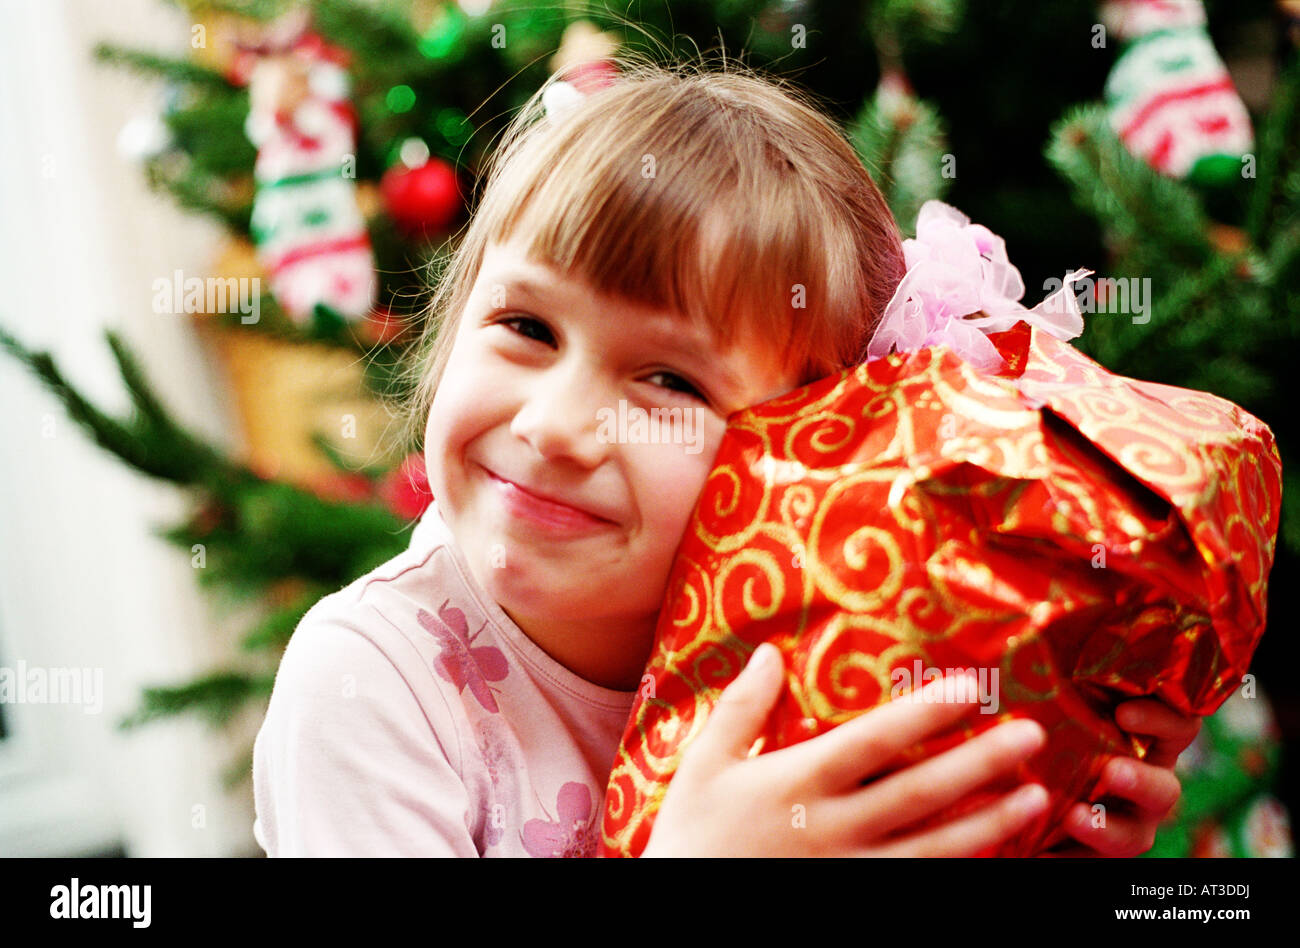 A girl holding a Christmas present Banque D'Images